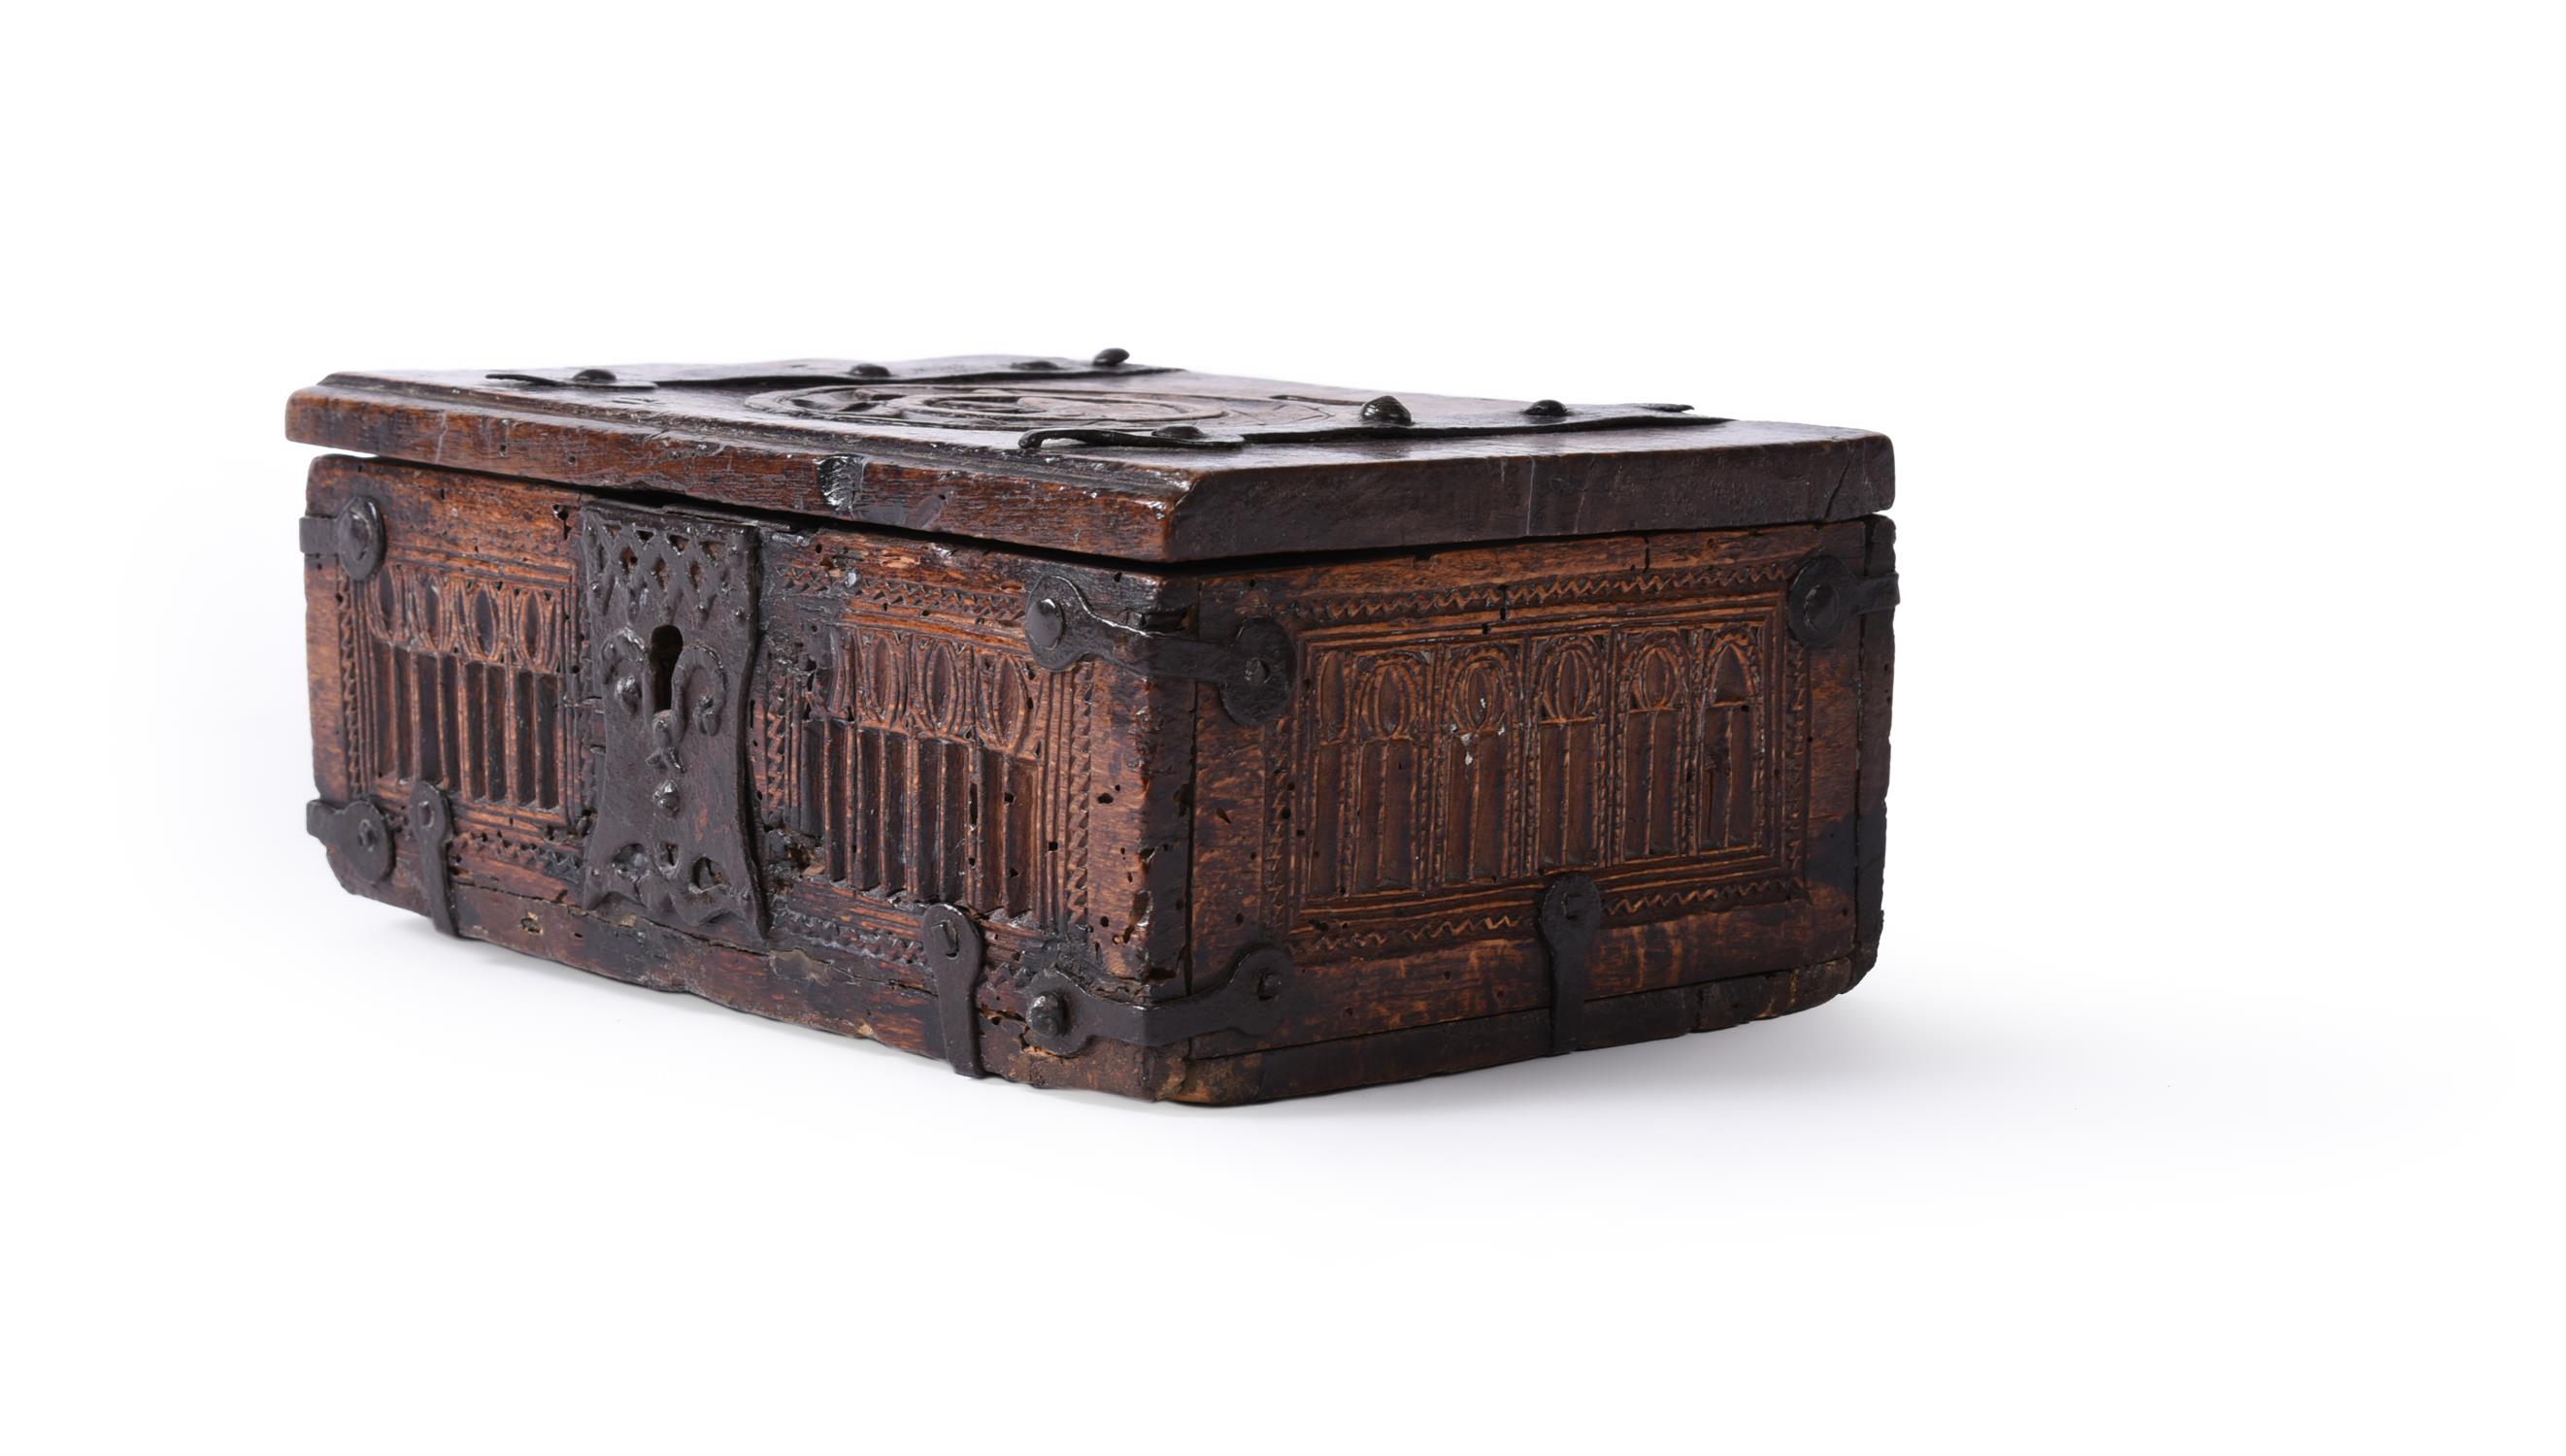 A North European carved oak and wrought iron bound offertory or alms box, 17th century - Image 7 of 10